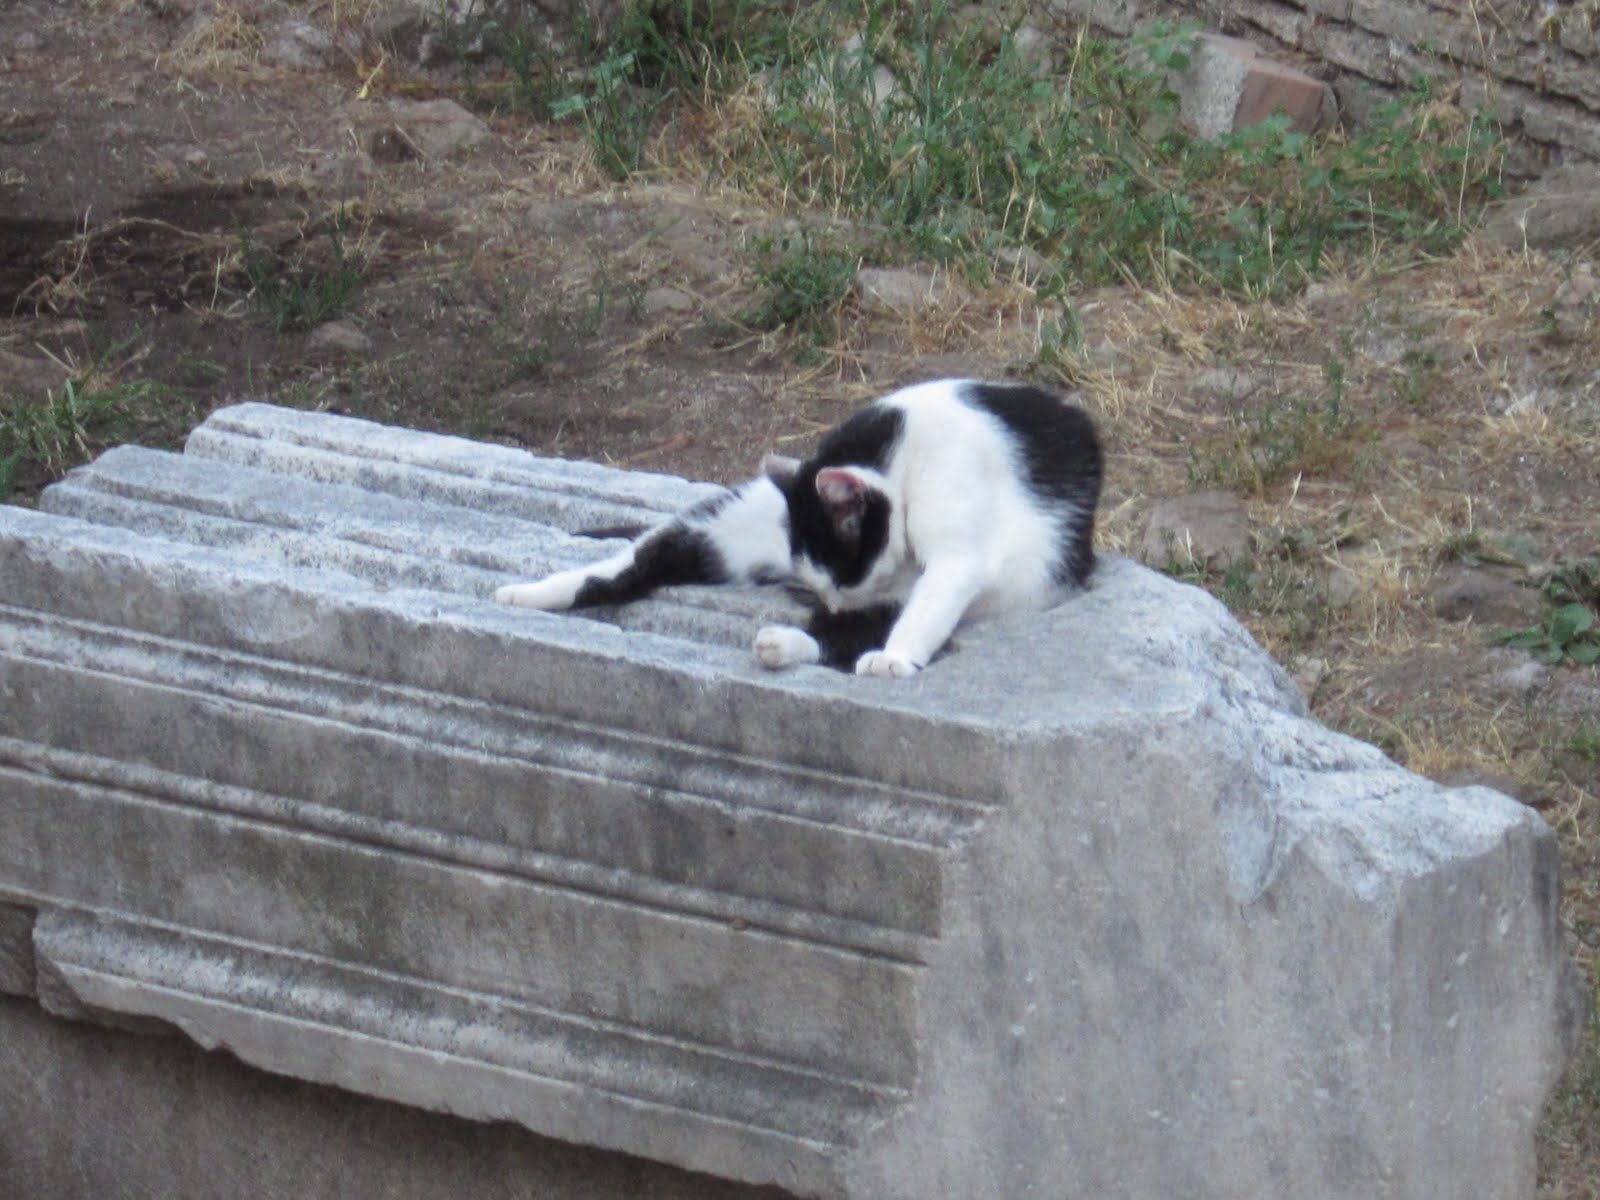 What a life, lounging around on ancient ruins!